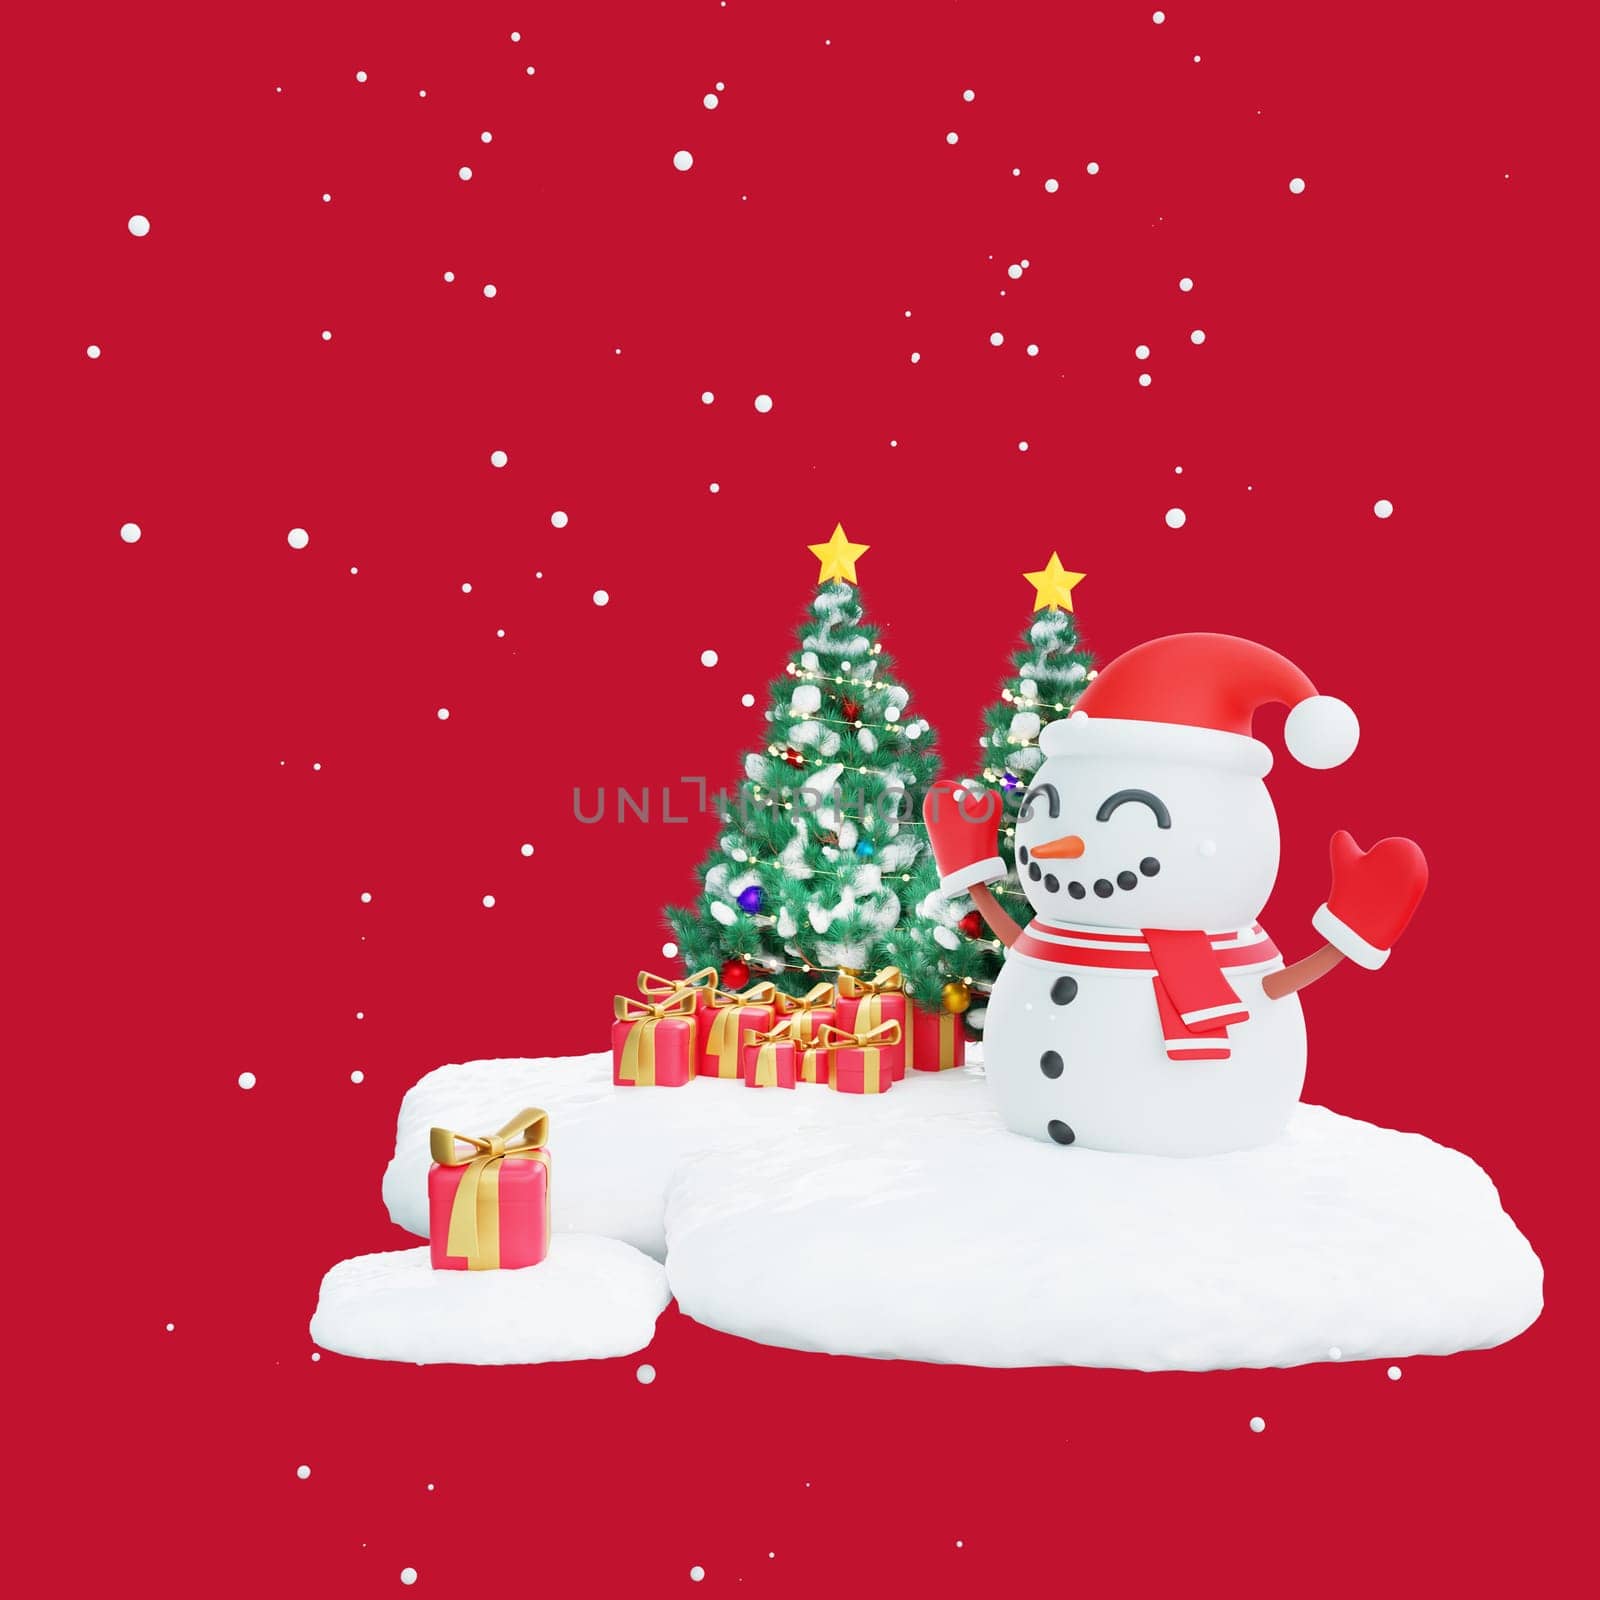 3D illustration of a cheerful snowman with a red Santa hat and mittens, standing next to a beautifully decorated Christmas tree with presents. Perfect for Christmas and Happy New Year celebrations